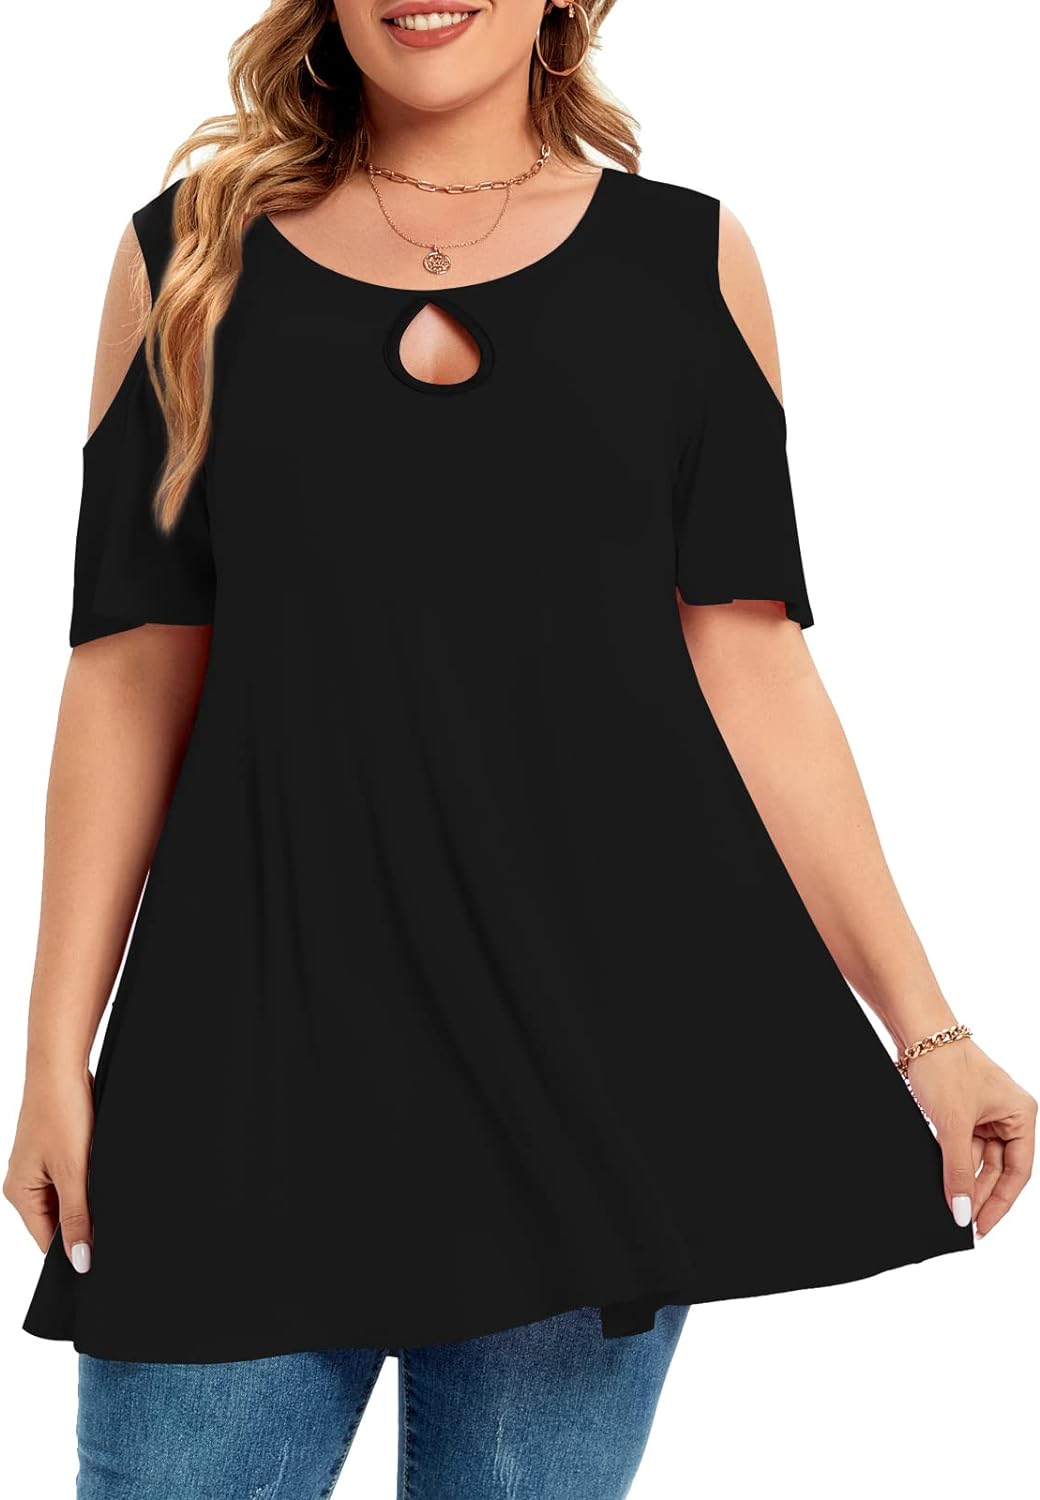 MONNURO Plus Size Cold Shoulder Tops For Women: A Stylish and Comfortable Choice